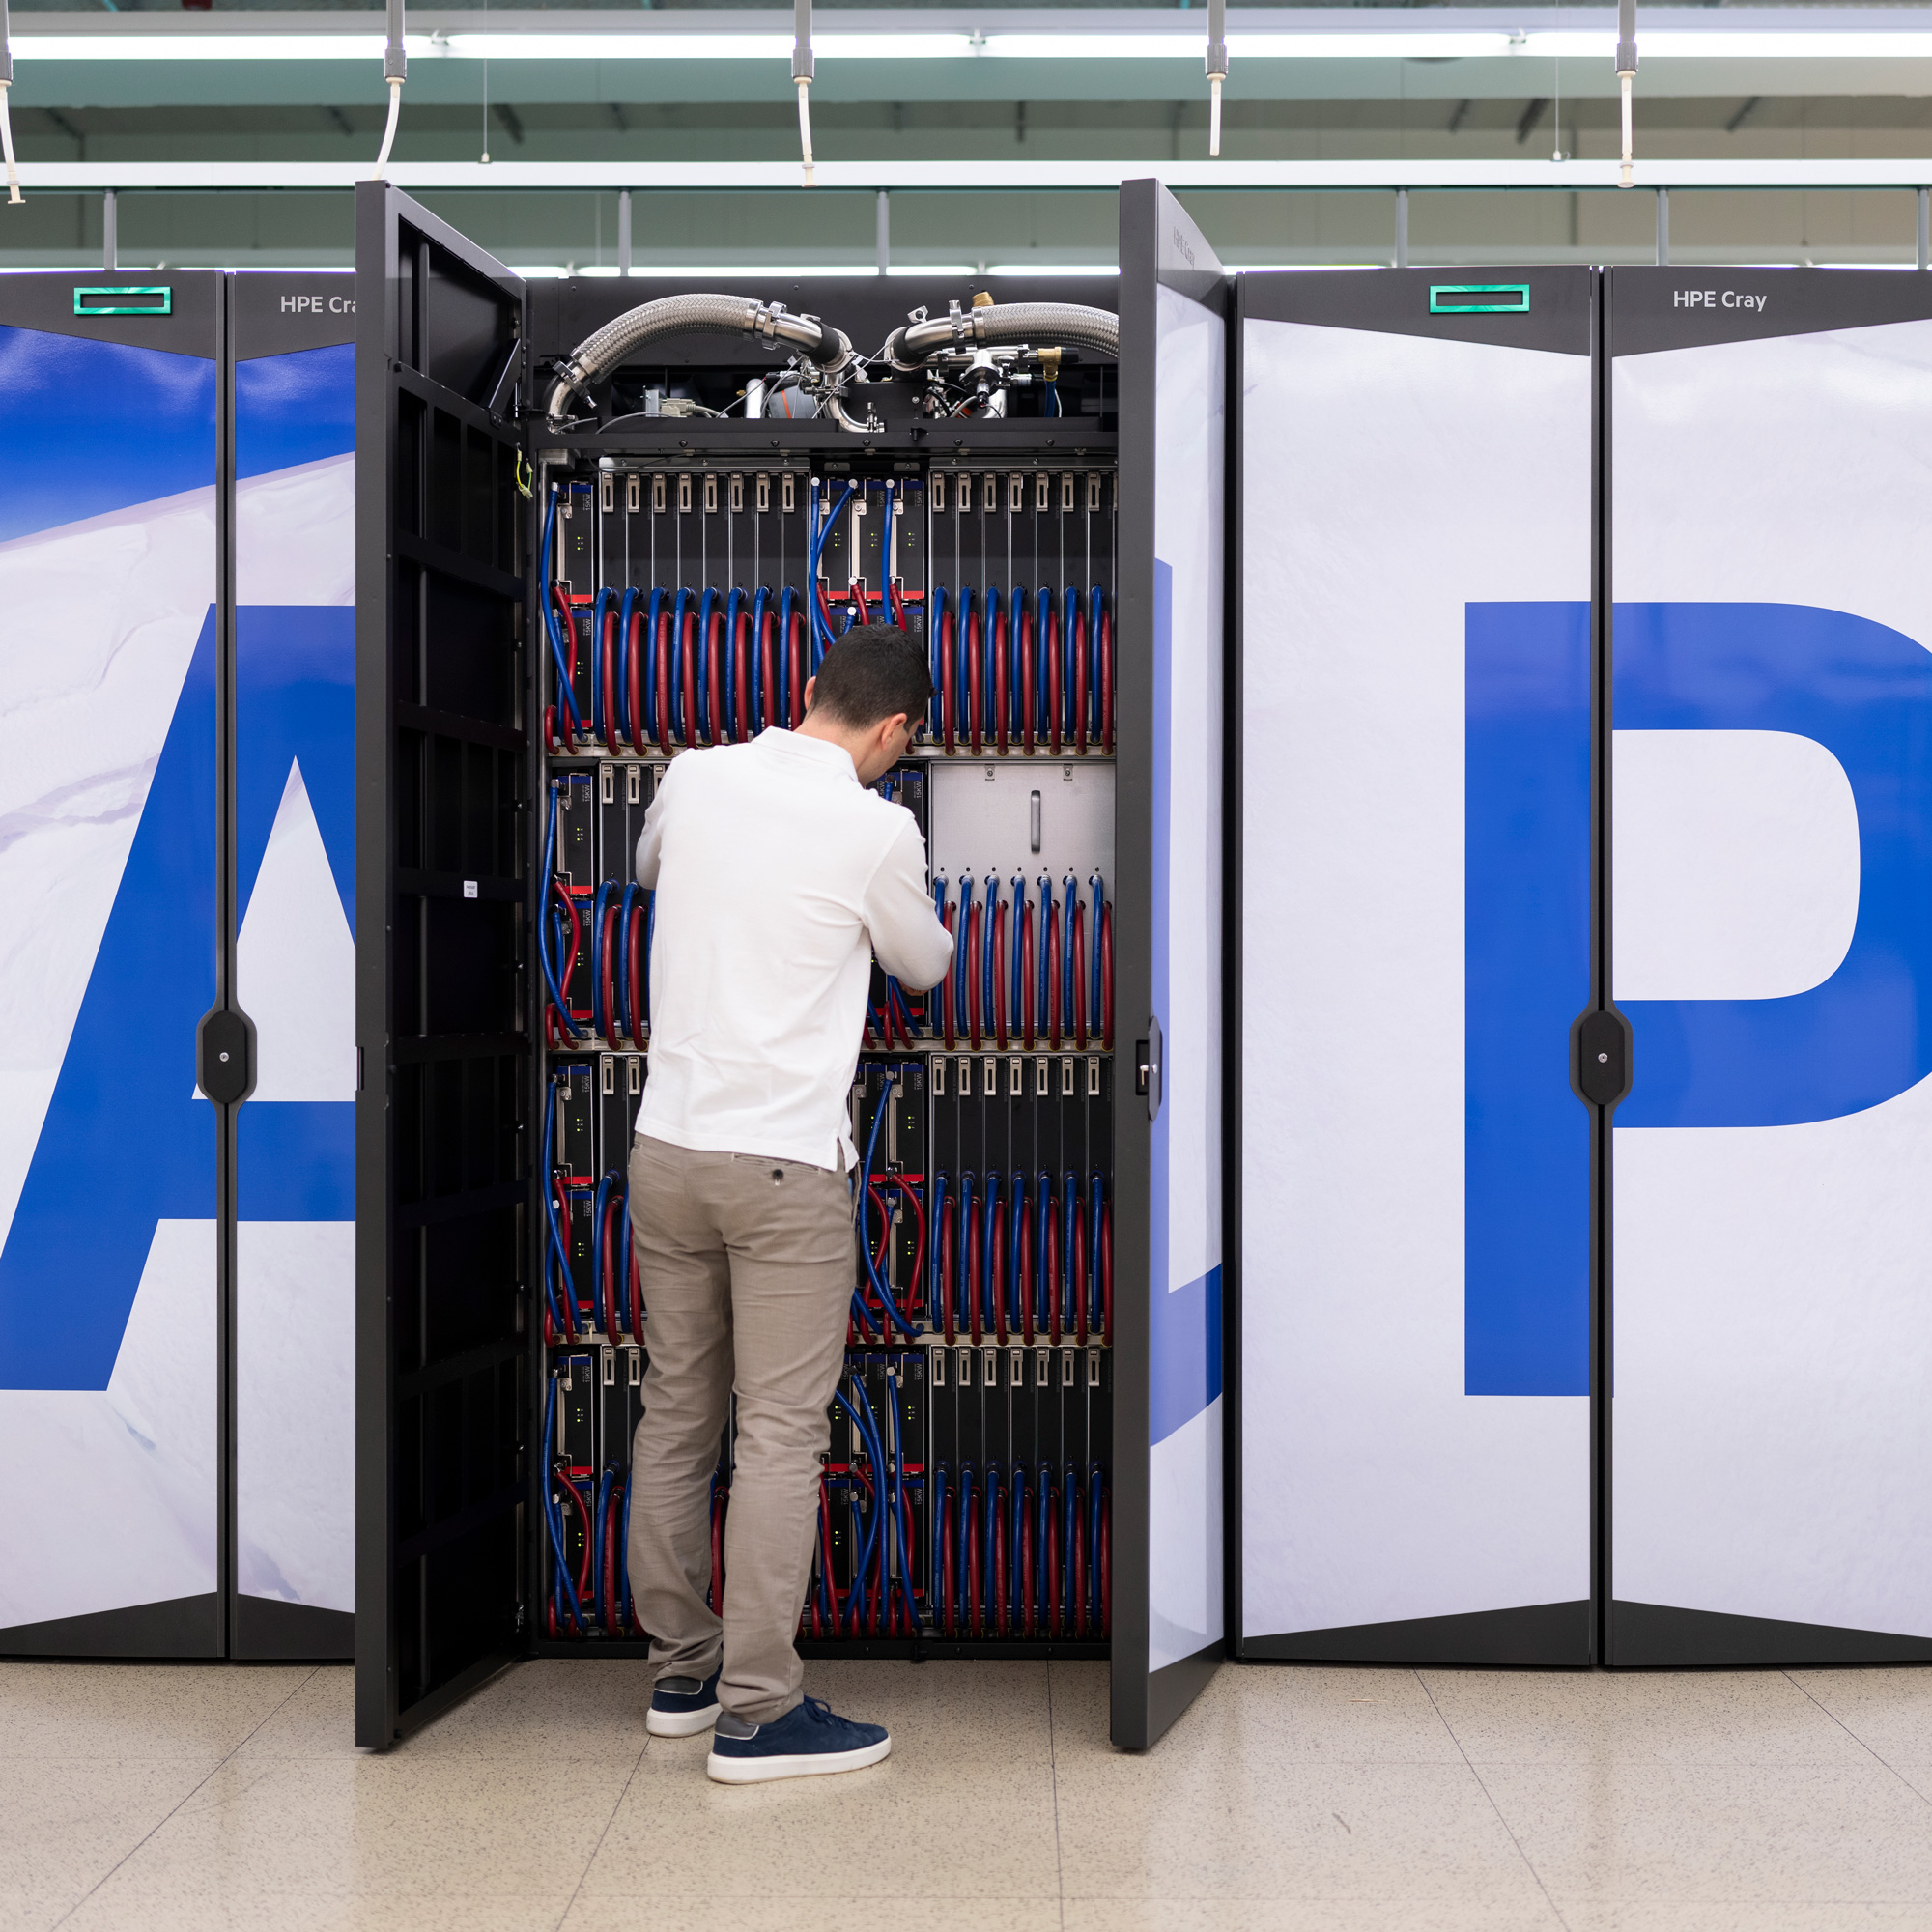 Enlarged view: A man is standing in front of the supercomputer.